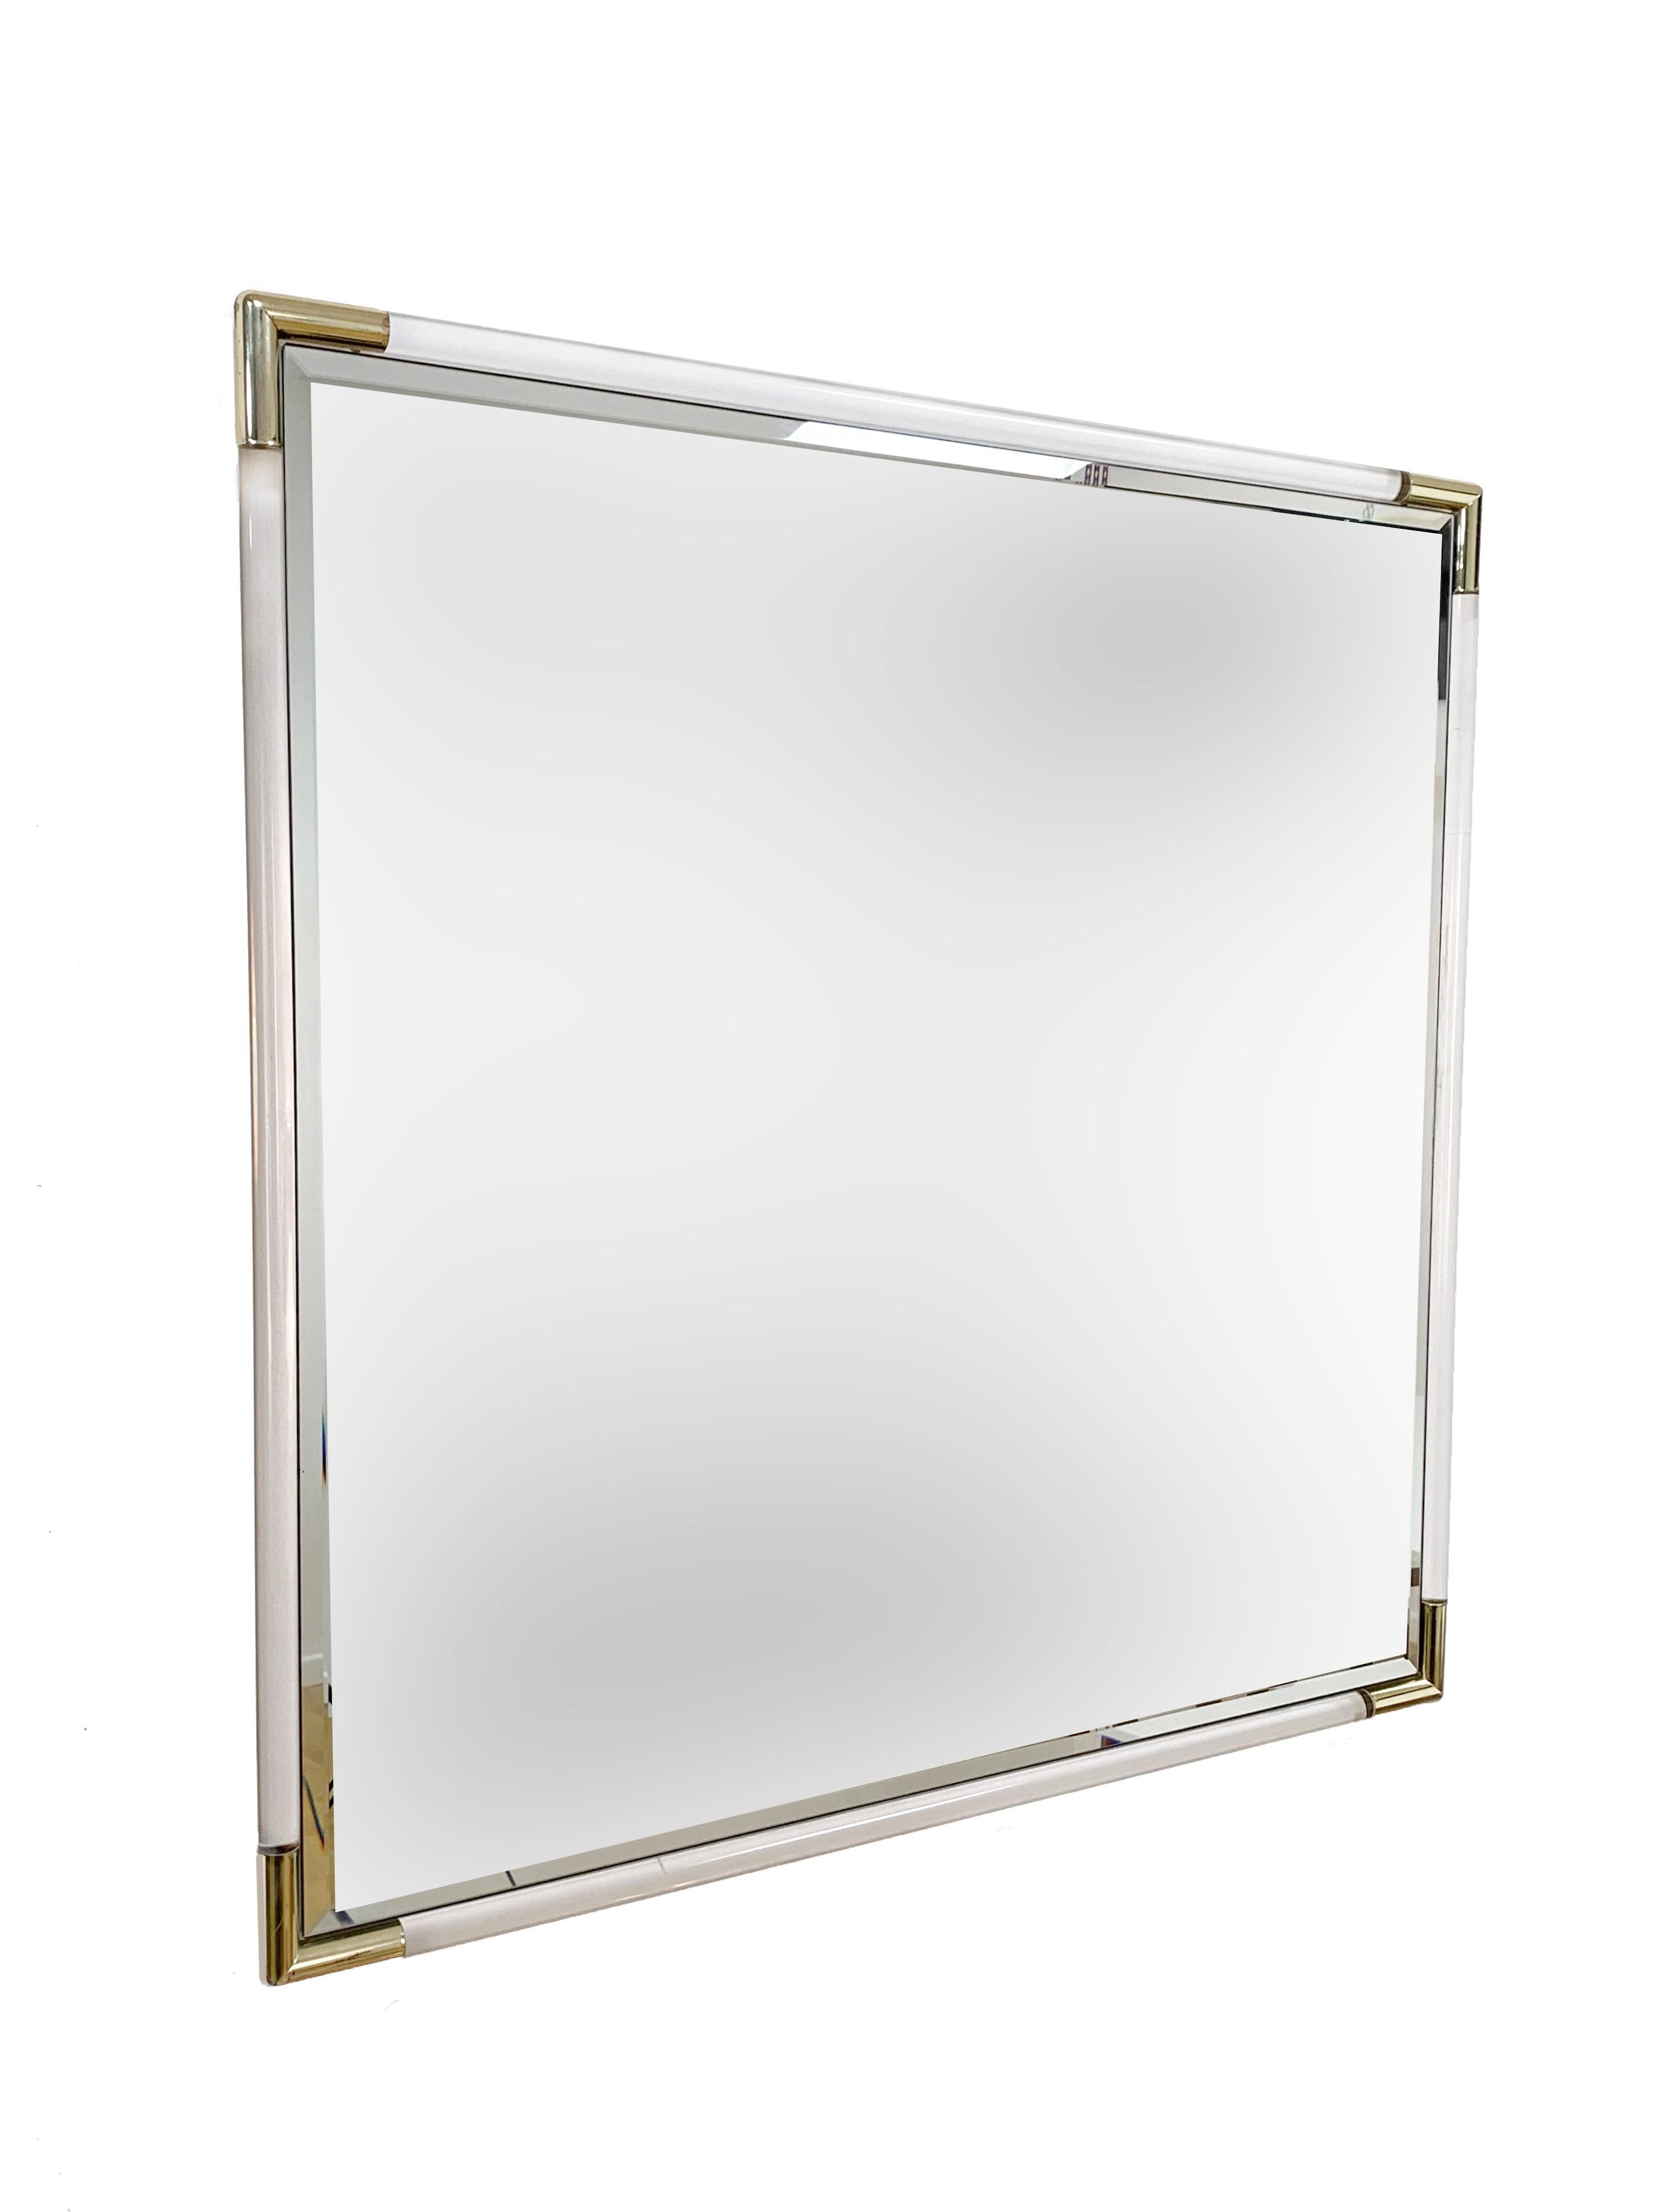 Elegant wall mirror, finely carved, with Lucite frame, corners in gilded metal. Signed. Square form
Italy, 1970s.
Measurements: 90 x 90 x 2.5 cm
Mirror measures: 85 x 85 cm.